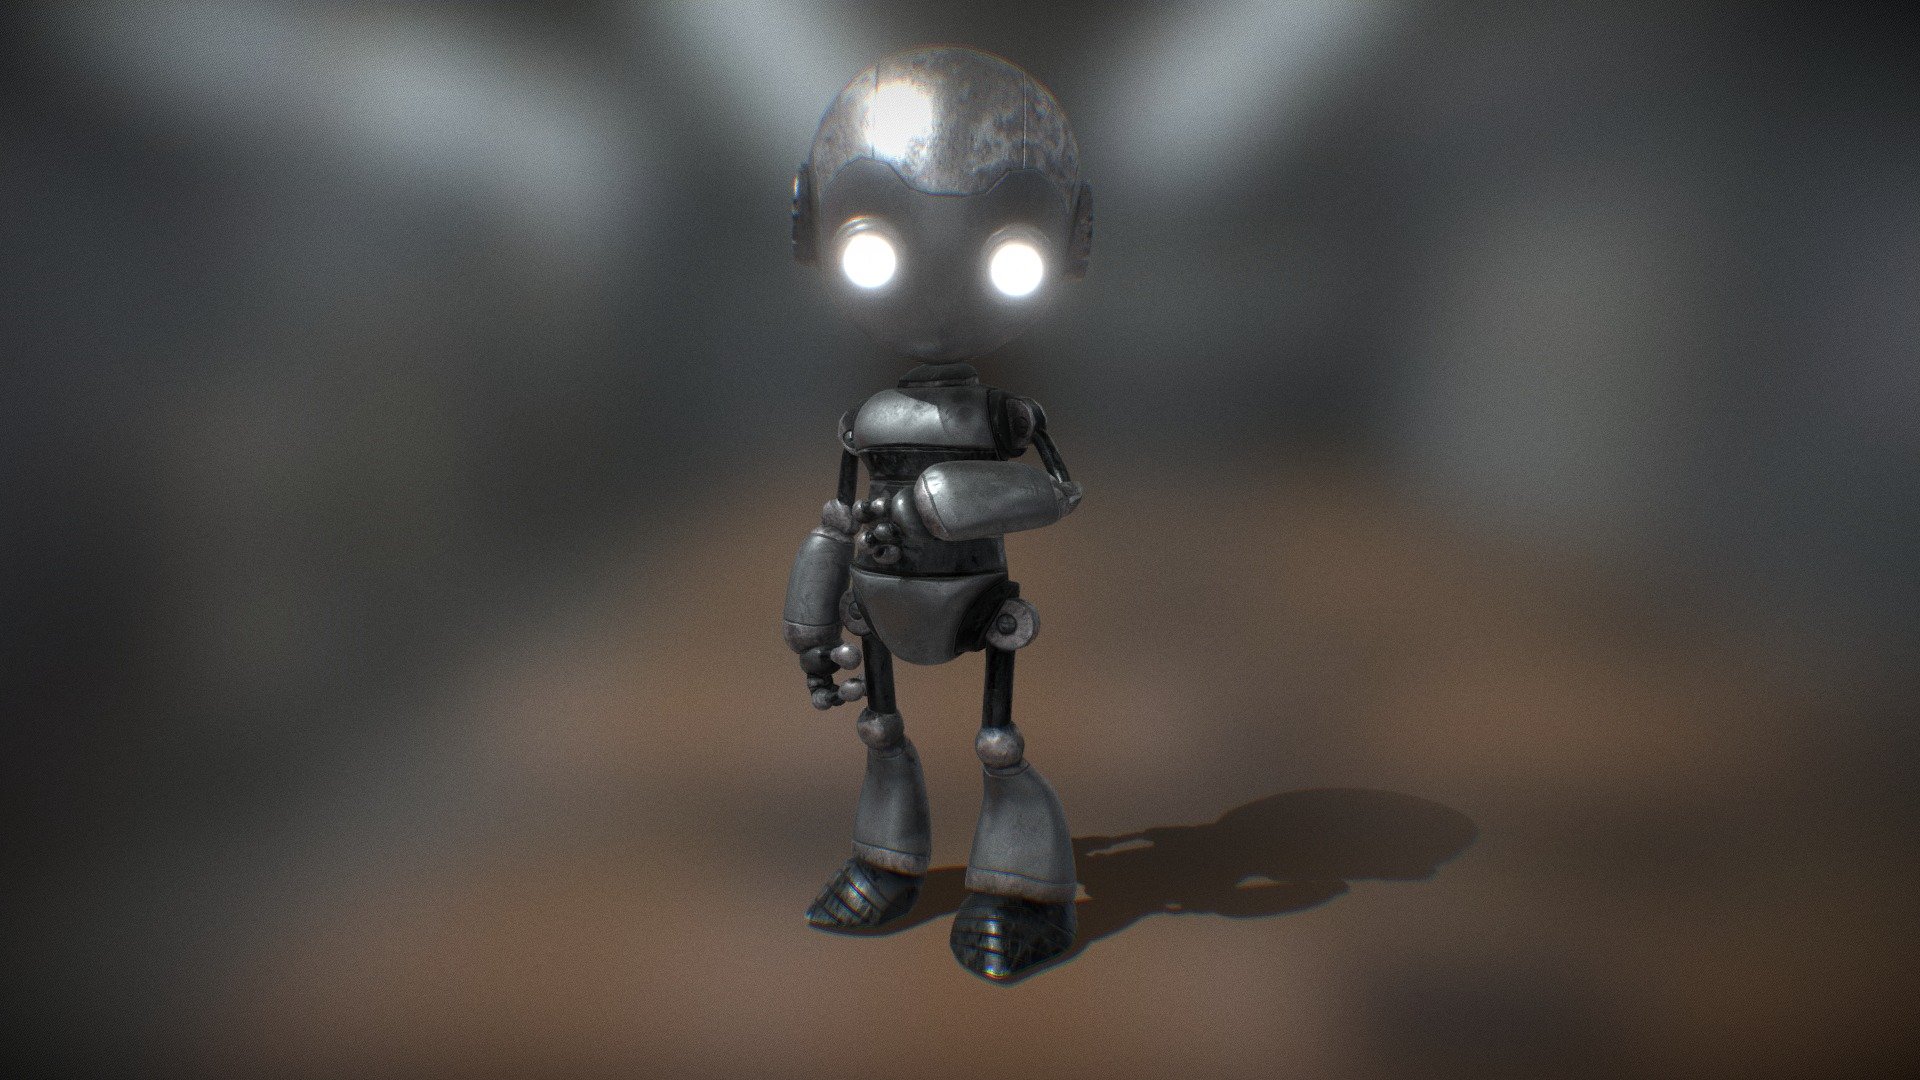 The character uses a Mixamo skeleton, has 6 subtools, might be good for games, you can use it if you need.I'm just learning software

reference: https://ru.pinterest.com/pin/443815738287308379/ - Smart Littel Robot - Download Free 3D model by DeadLink (@hell3879) 3d model